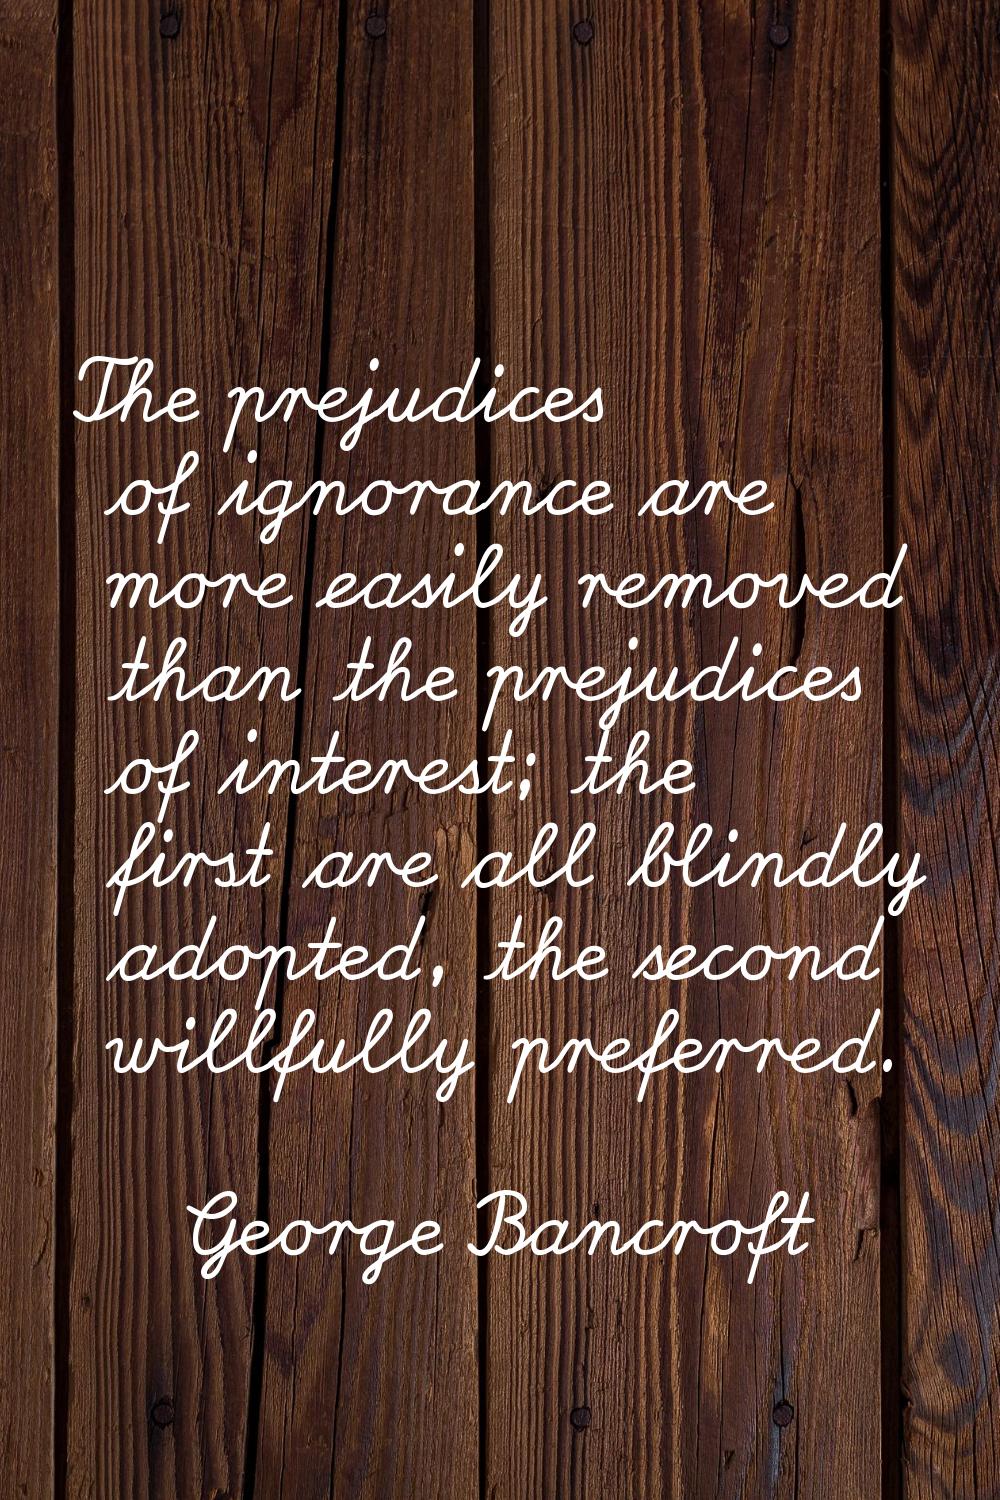 The prejudices of ignorance are more easily removed than the prejudices of interest; the first are 